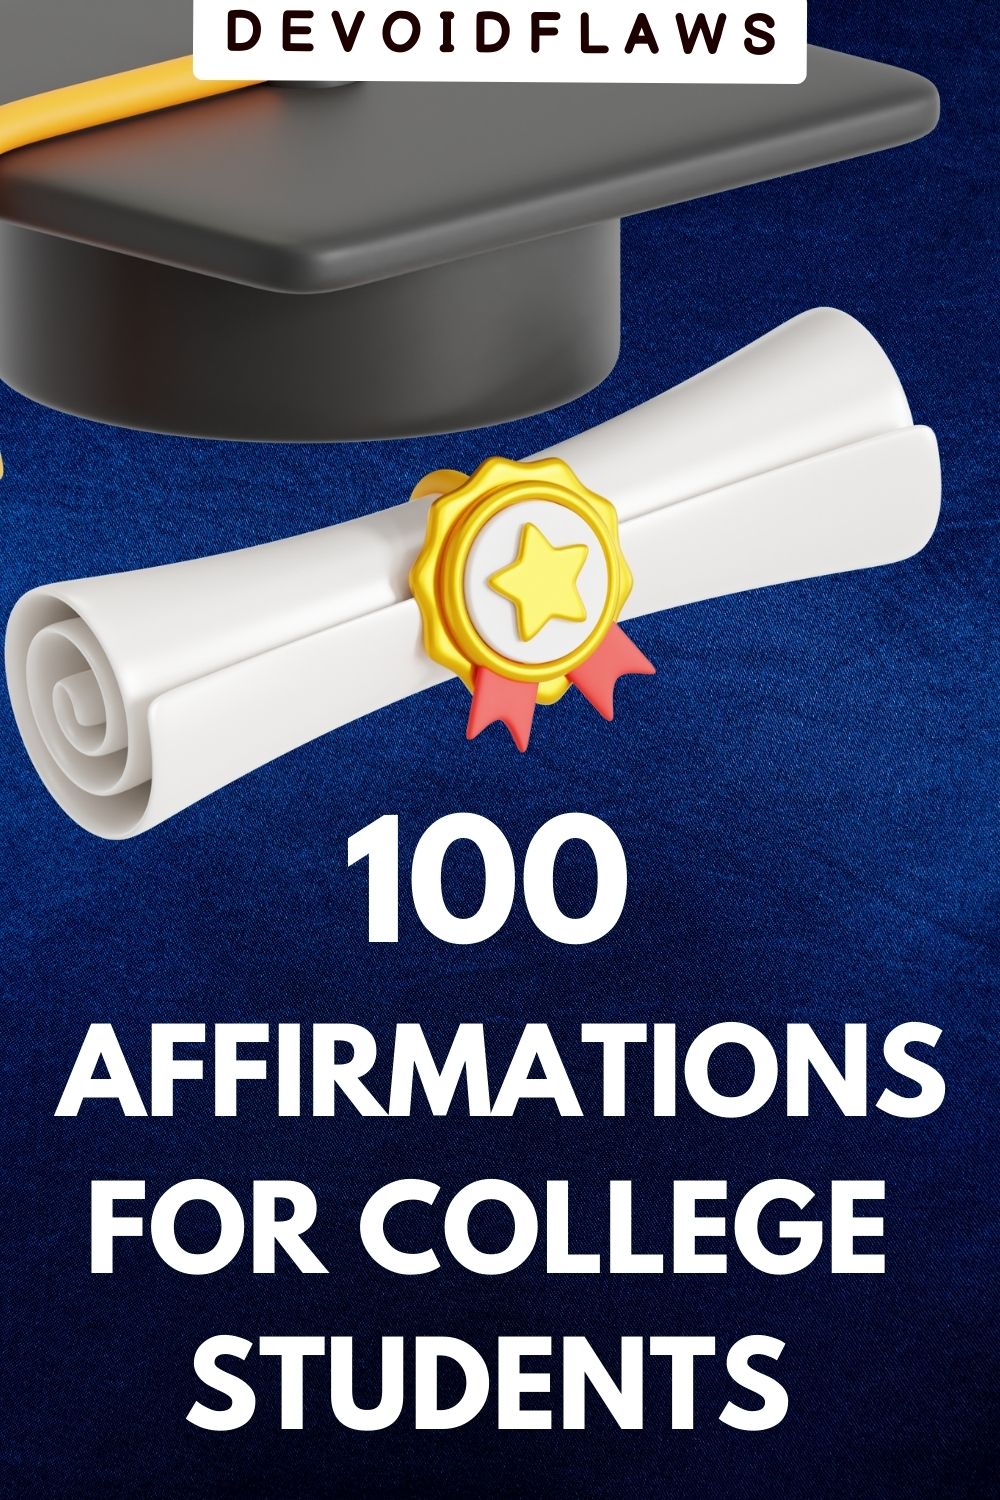 blue background image with text - best affirmations for college students